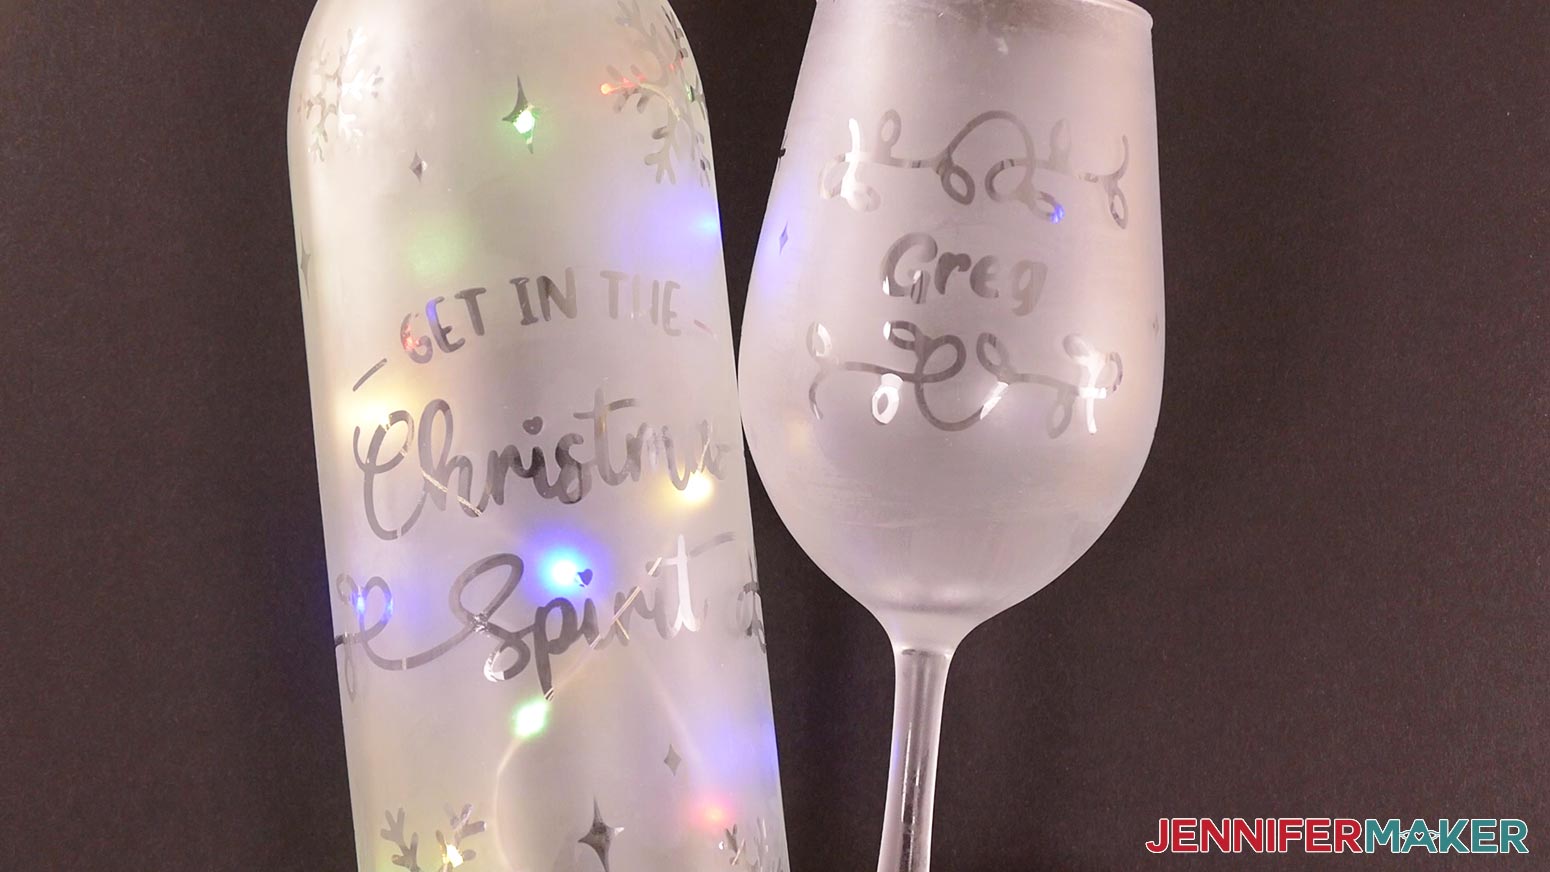 A finished clear wine bottle and glass with the Christmas designs reverse etched onto them for the etched wine glasses and bottles project